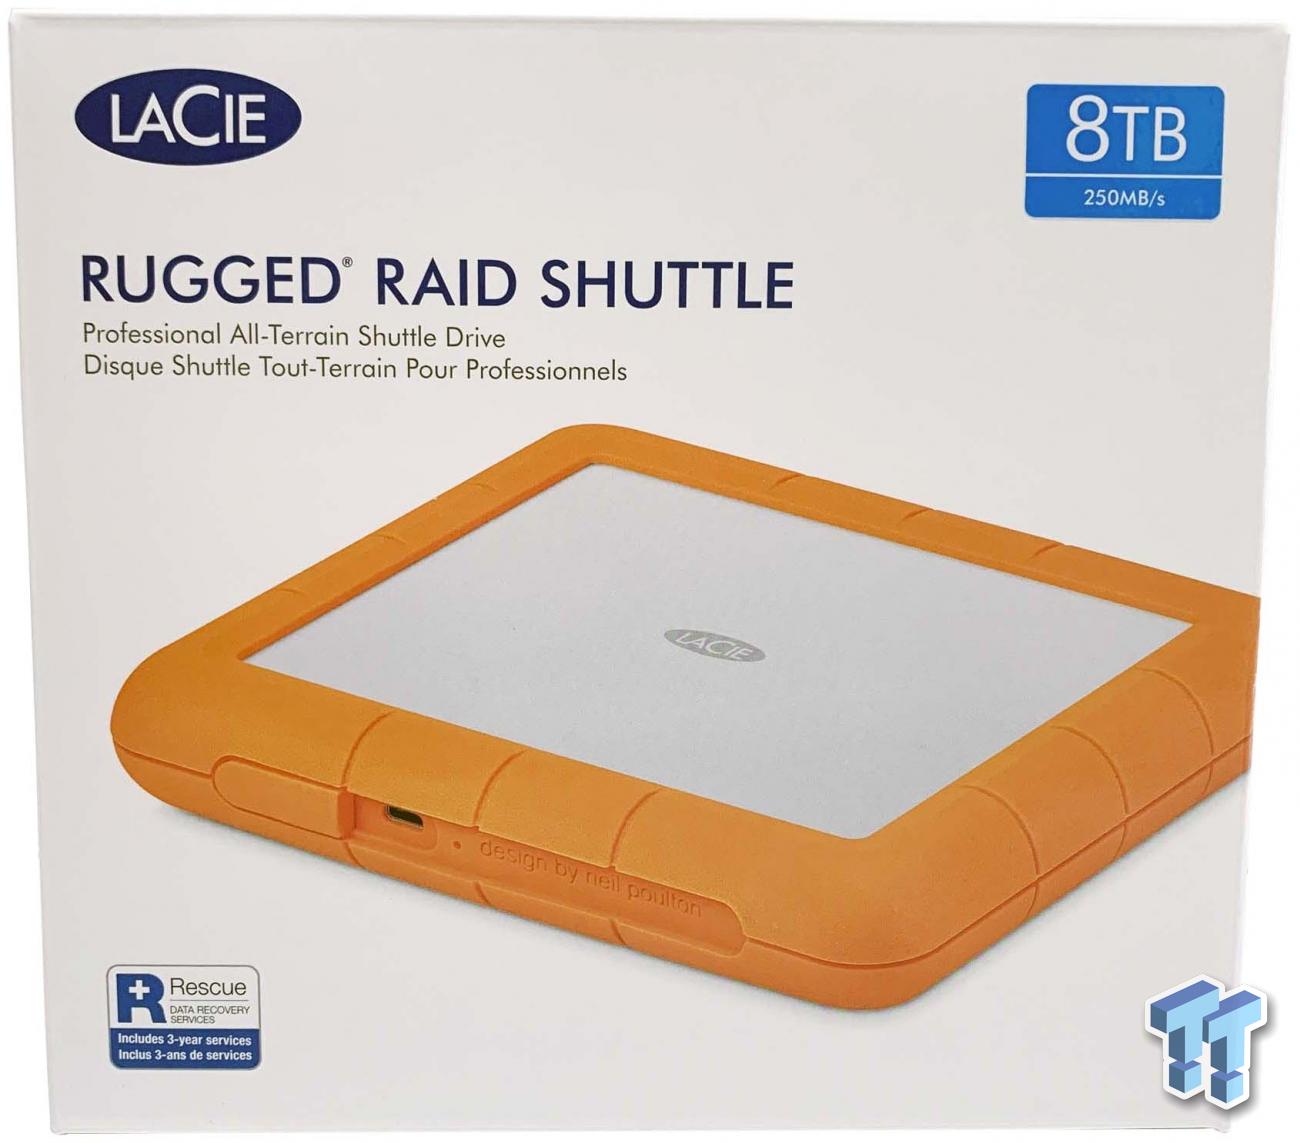 Why is the LaCie Rugged Orange? - LaCie Blog